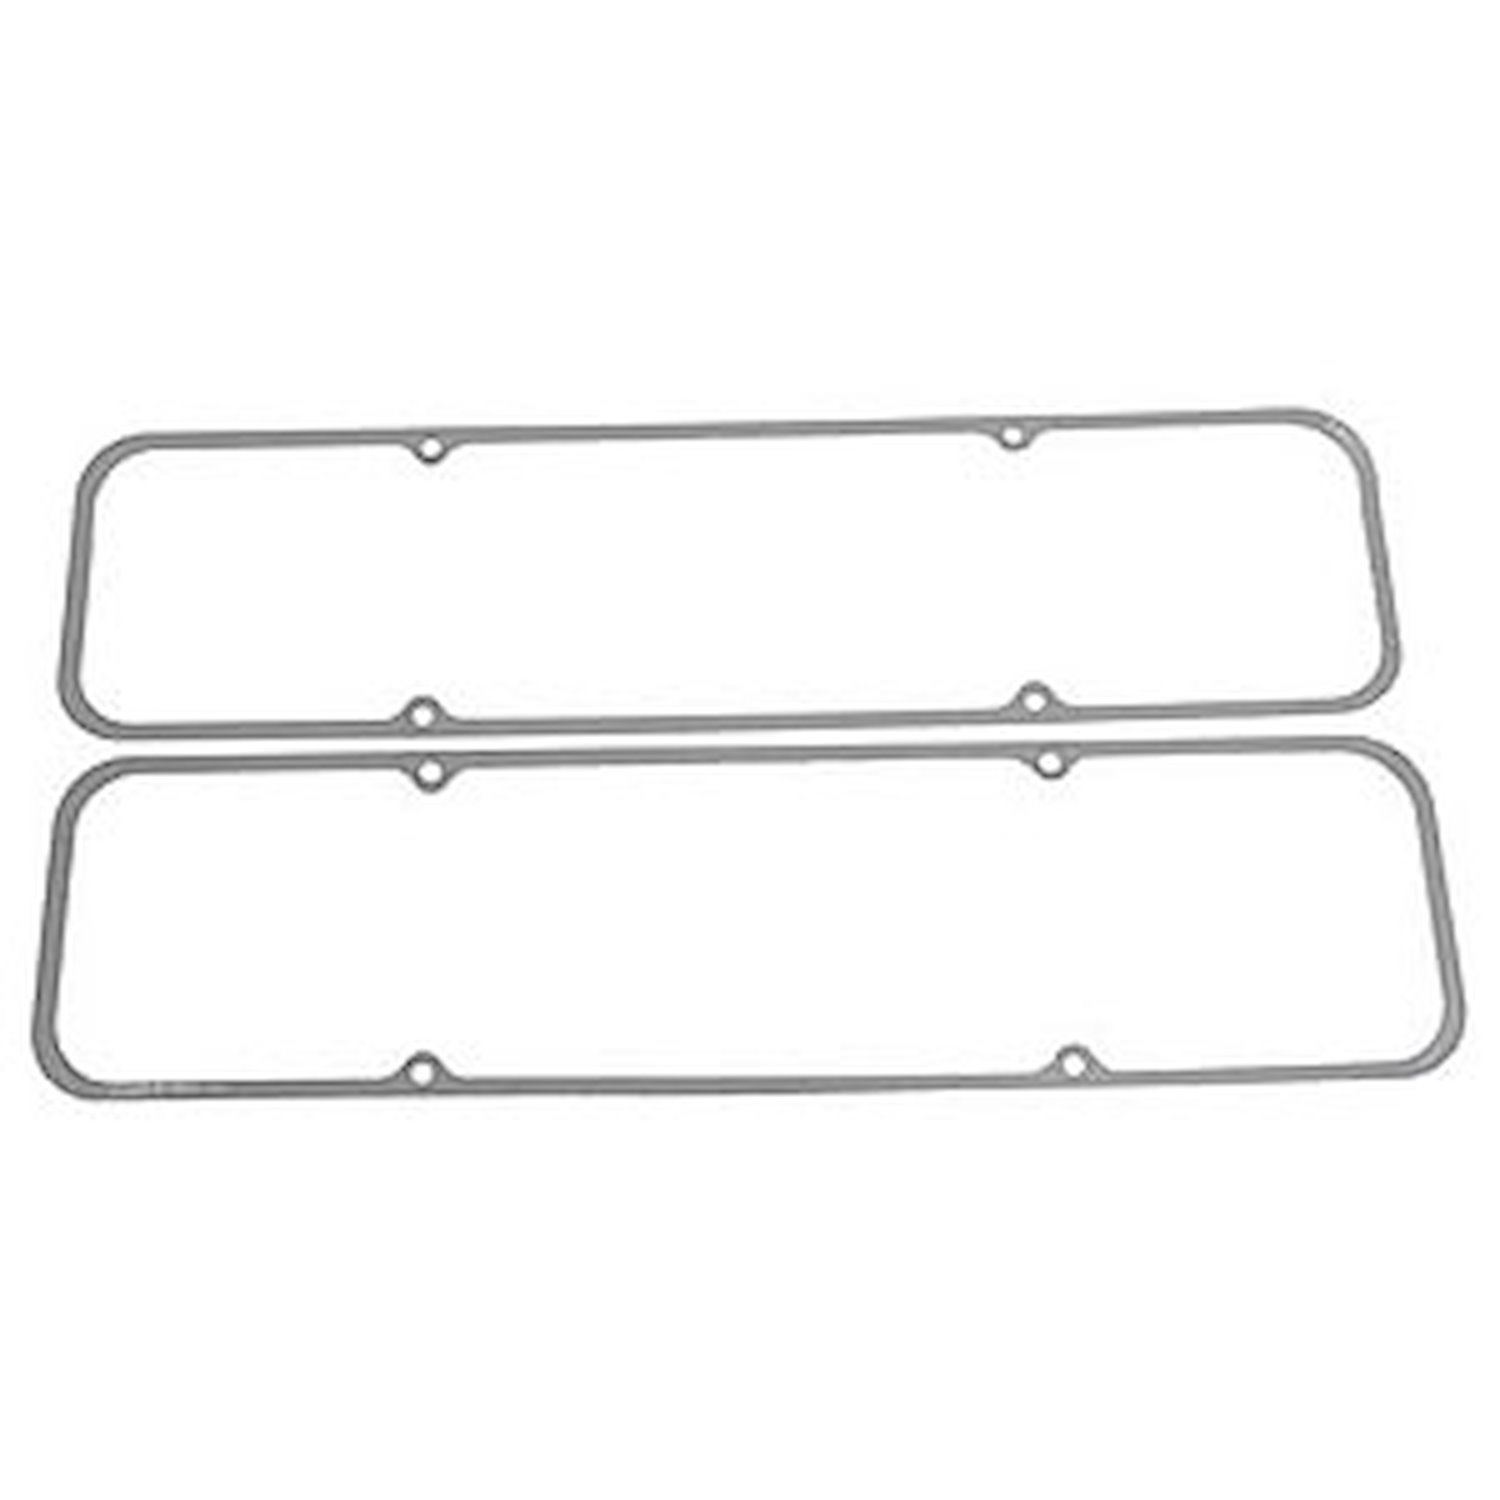 Valve Cover Gaskets Buick V6 (Stage I & II)